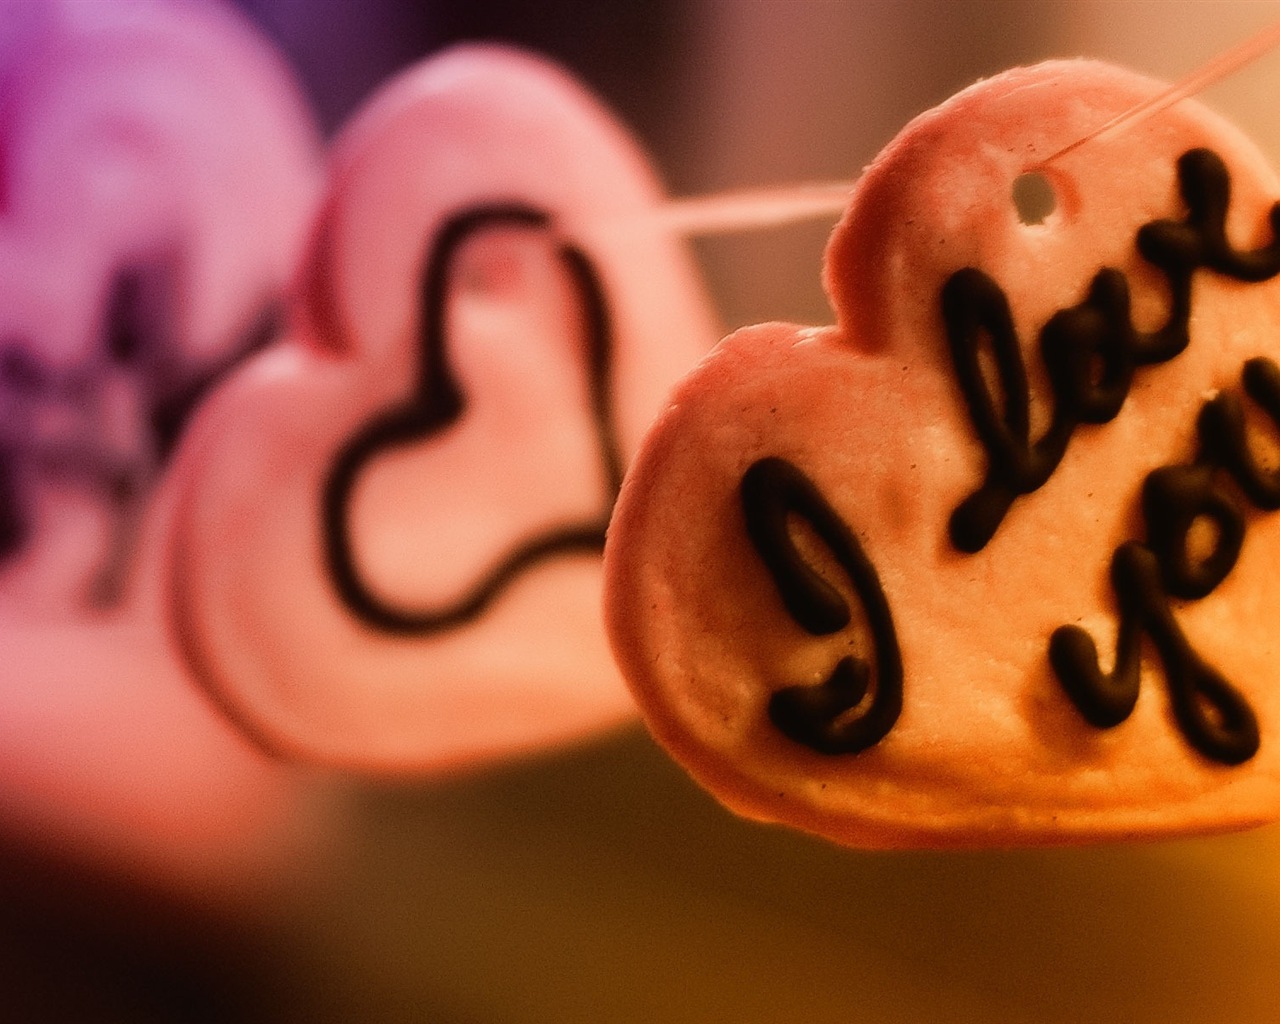 Warm and romantic Valentine's Day HD wallpapers #4 - 1280x1024